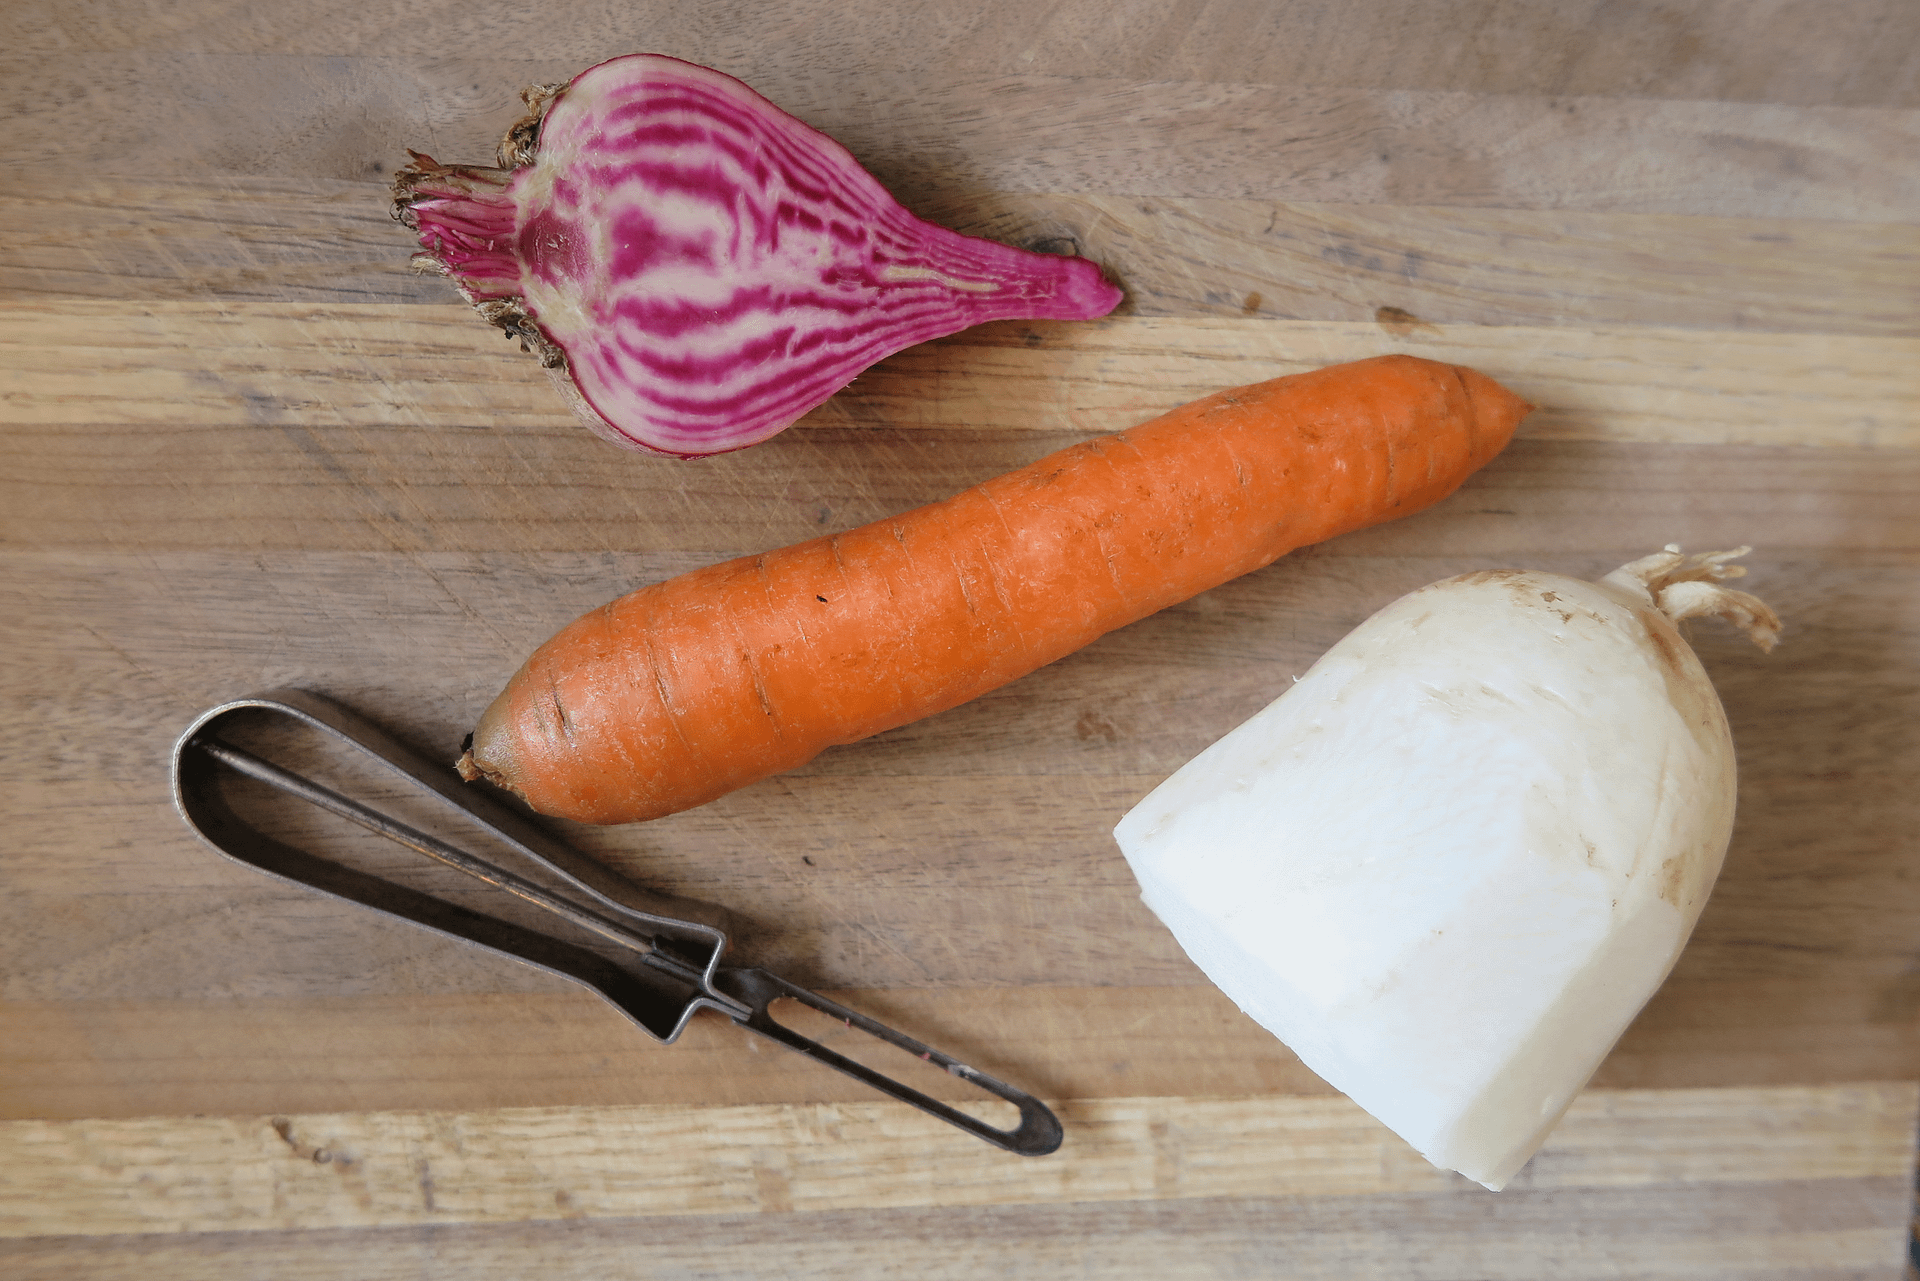 Two types of radishes and a carrot laying on a wooden cutting board ready to be peeled and chopped